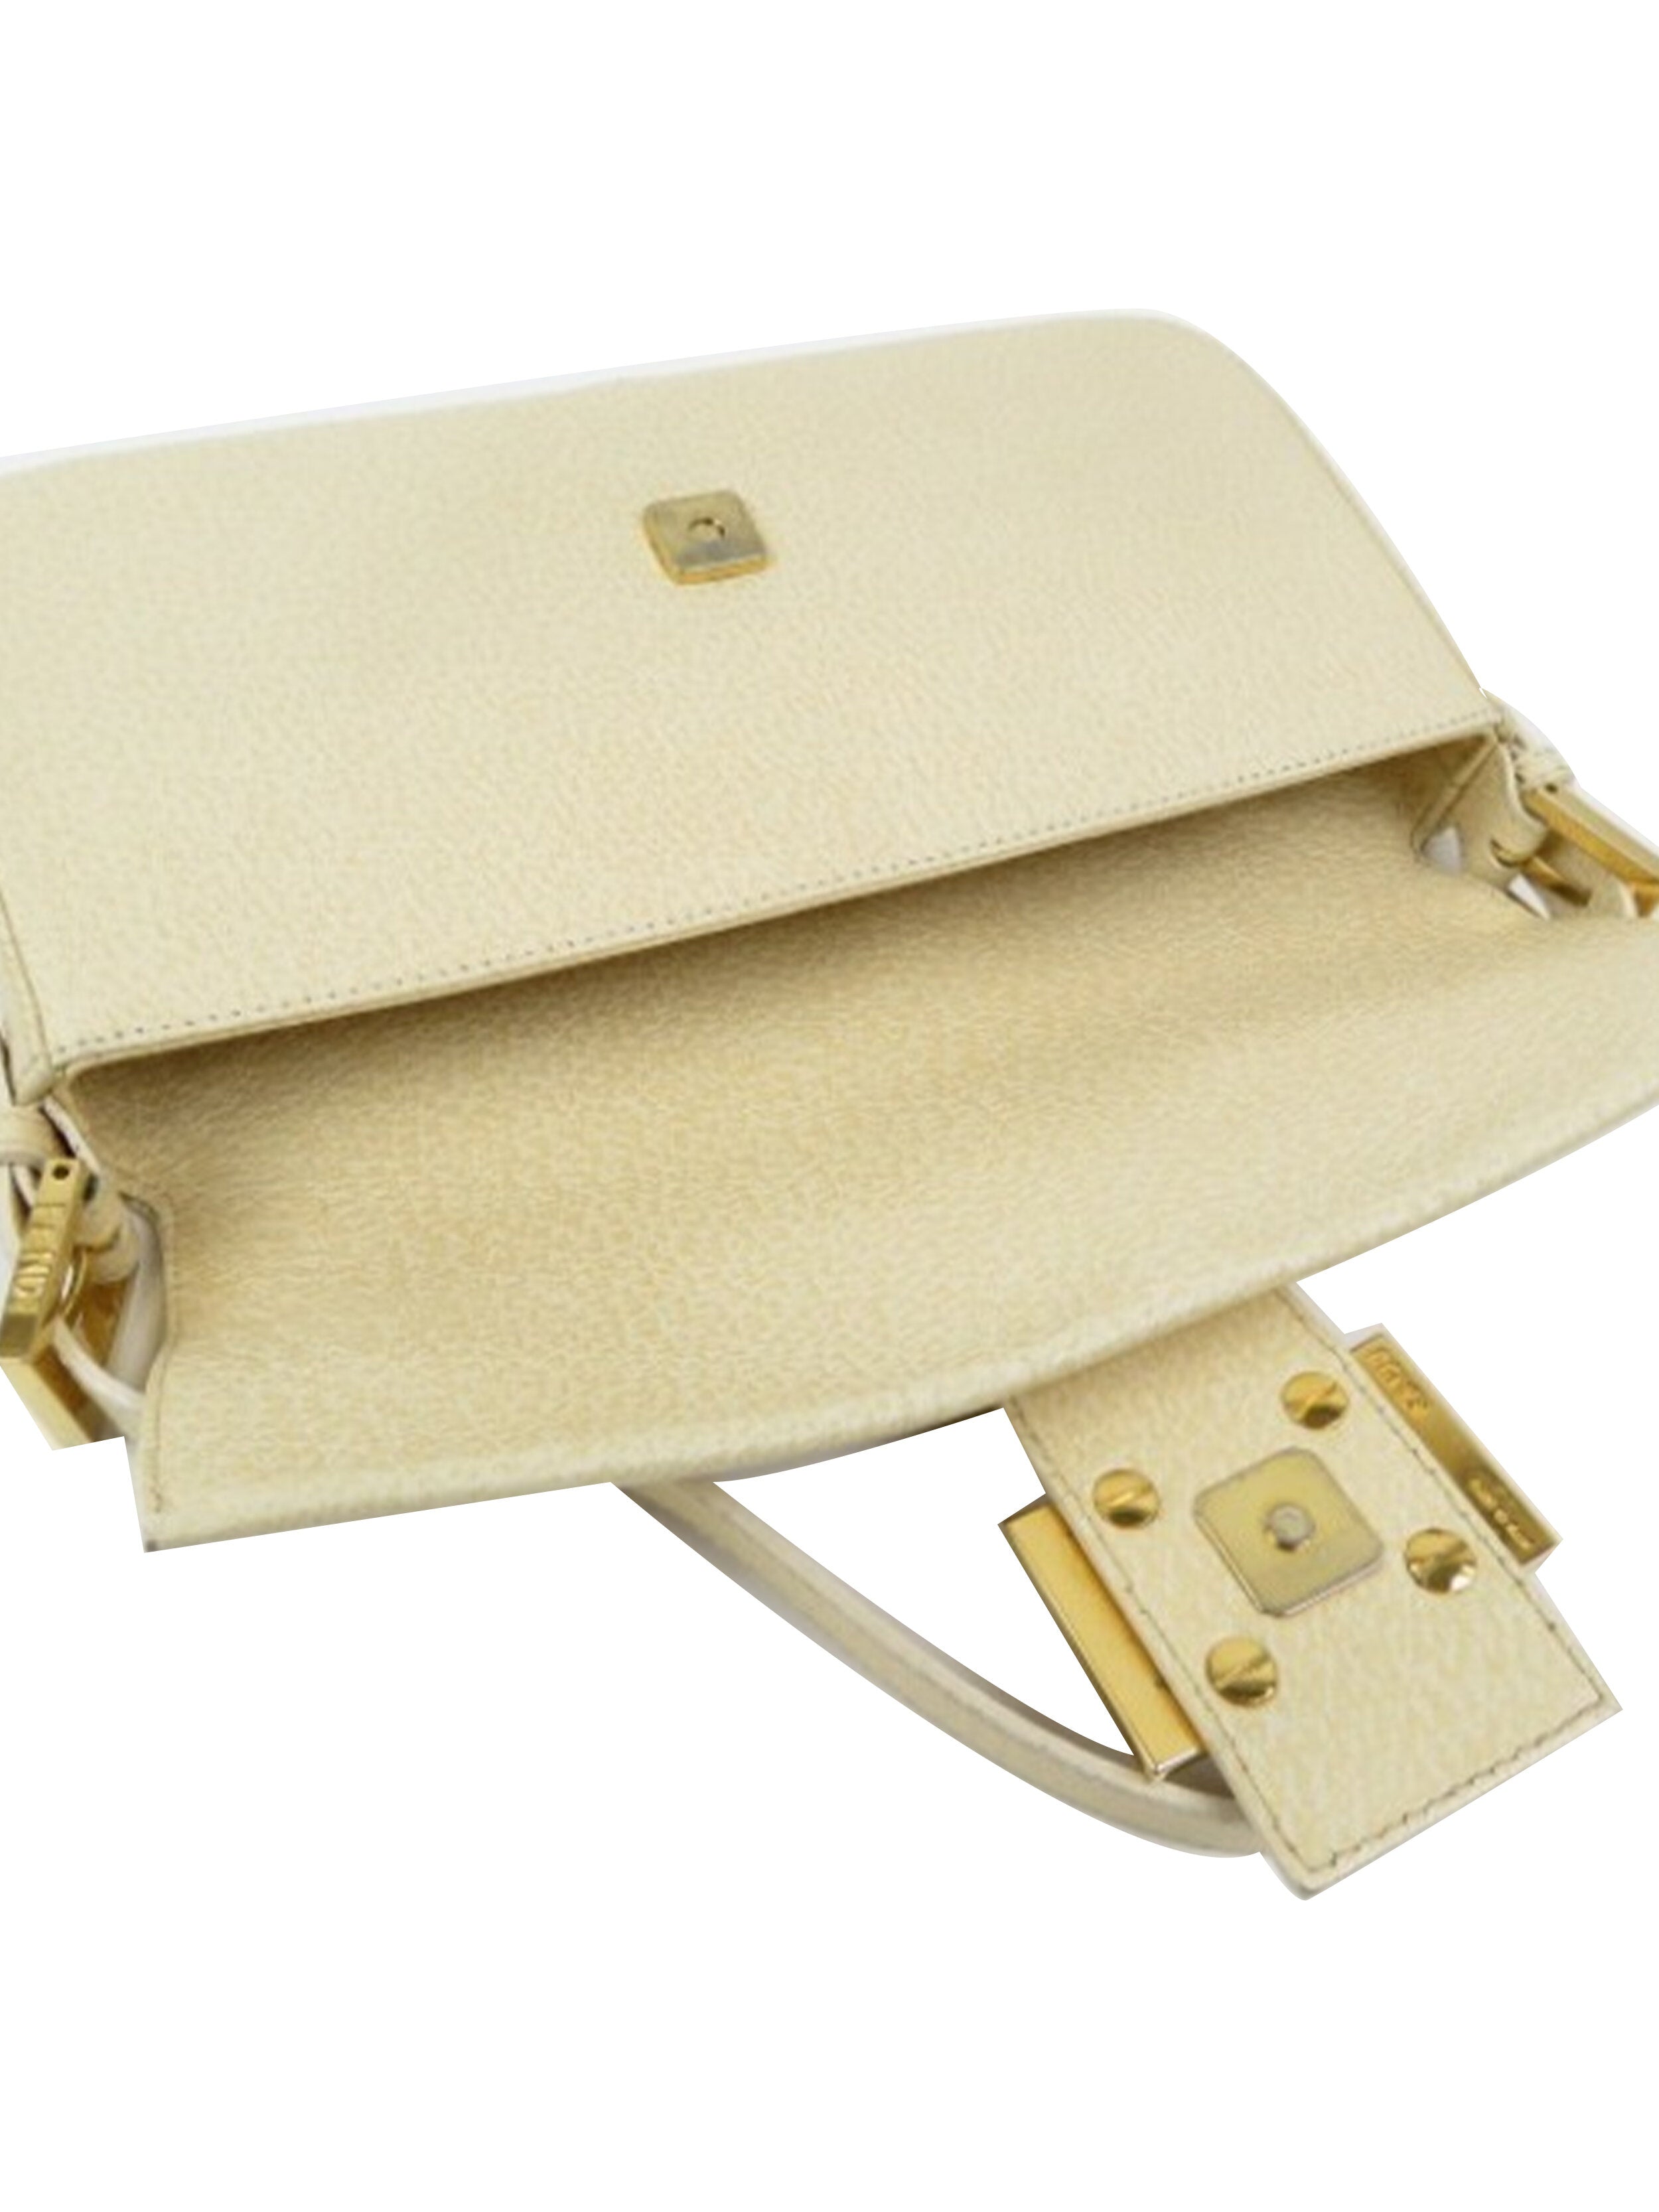 Fendi 2000s Rare Ivory and Pink Leather Baguette